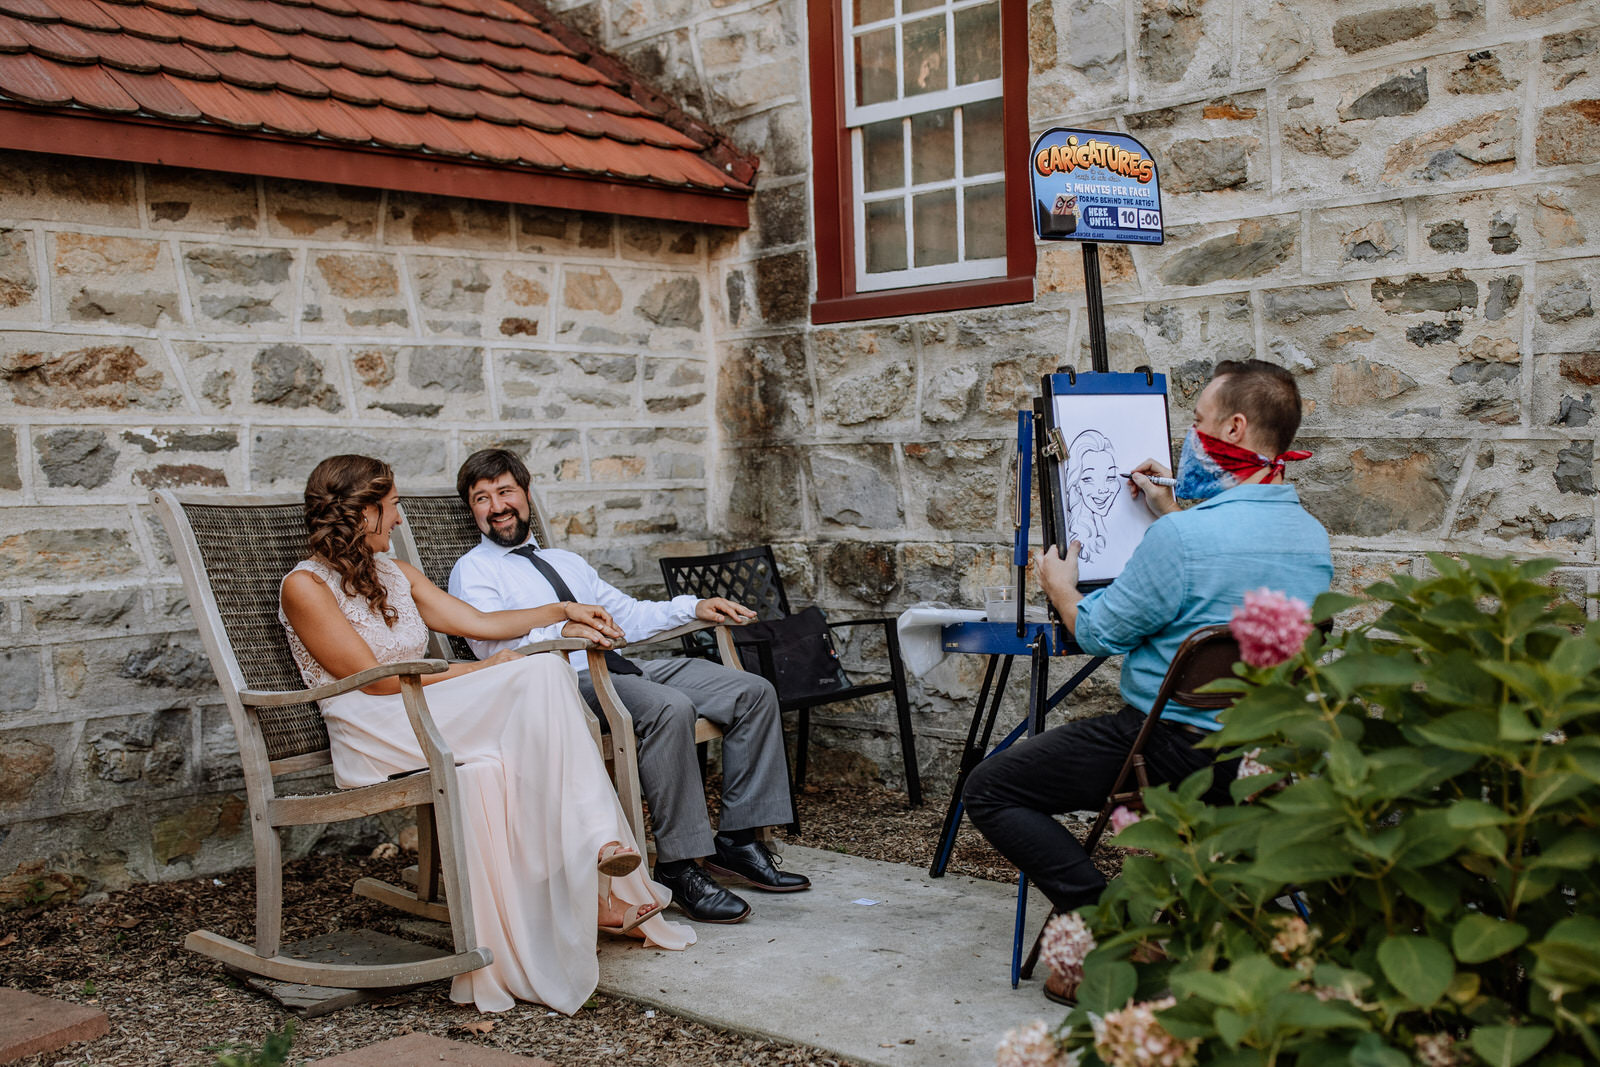 Wedding guests sitting and having their caricature drawn by an artist